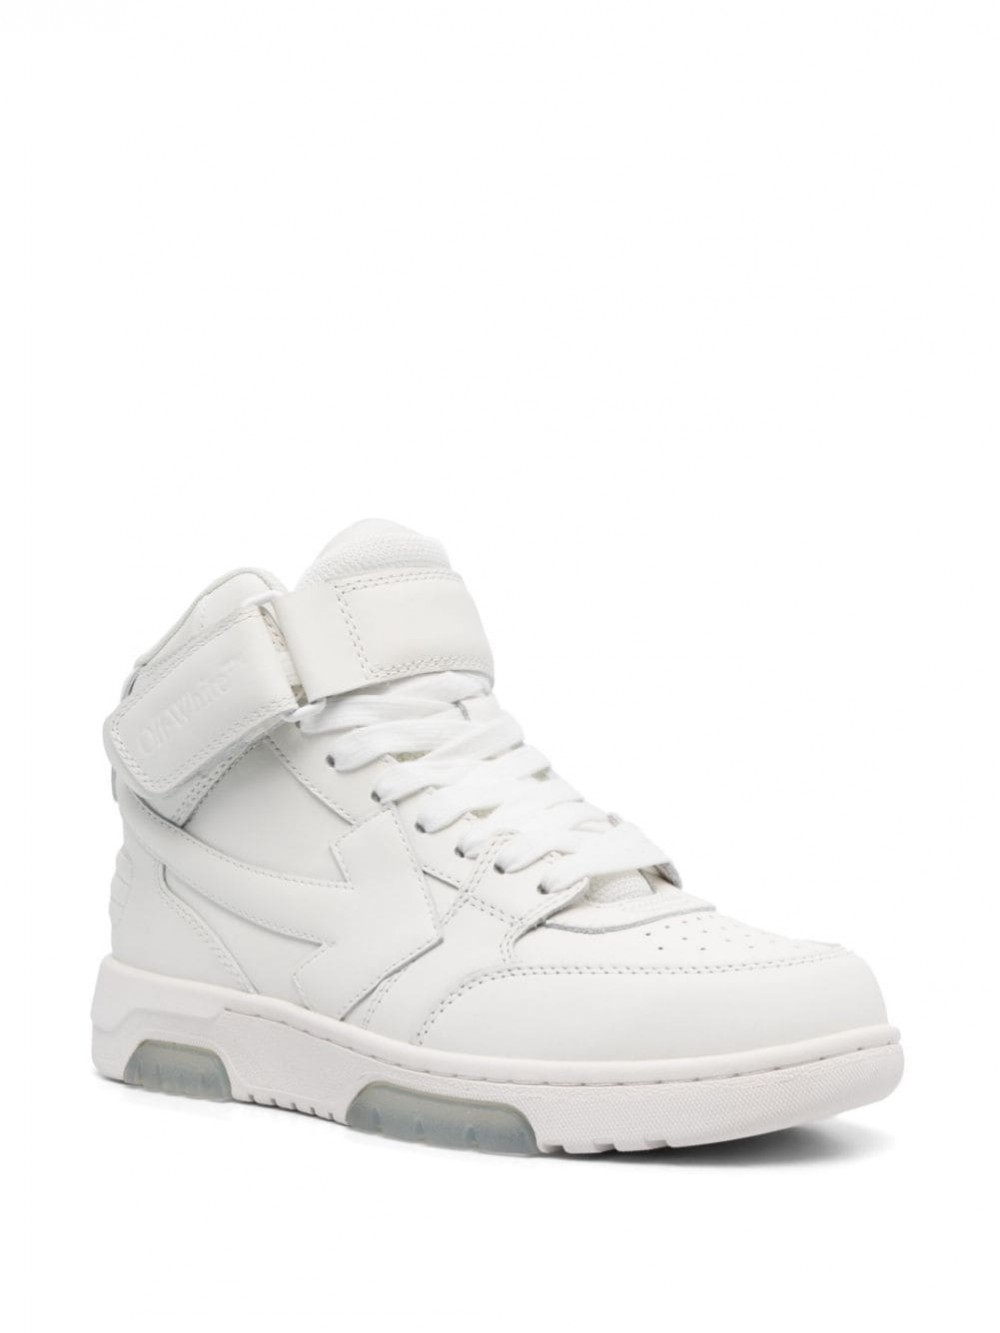 OFF-WHITE Out of Office Calf Leather Sneaker in Pink. Size 39.